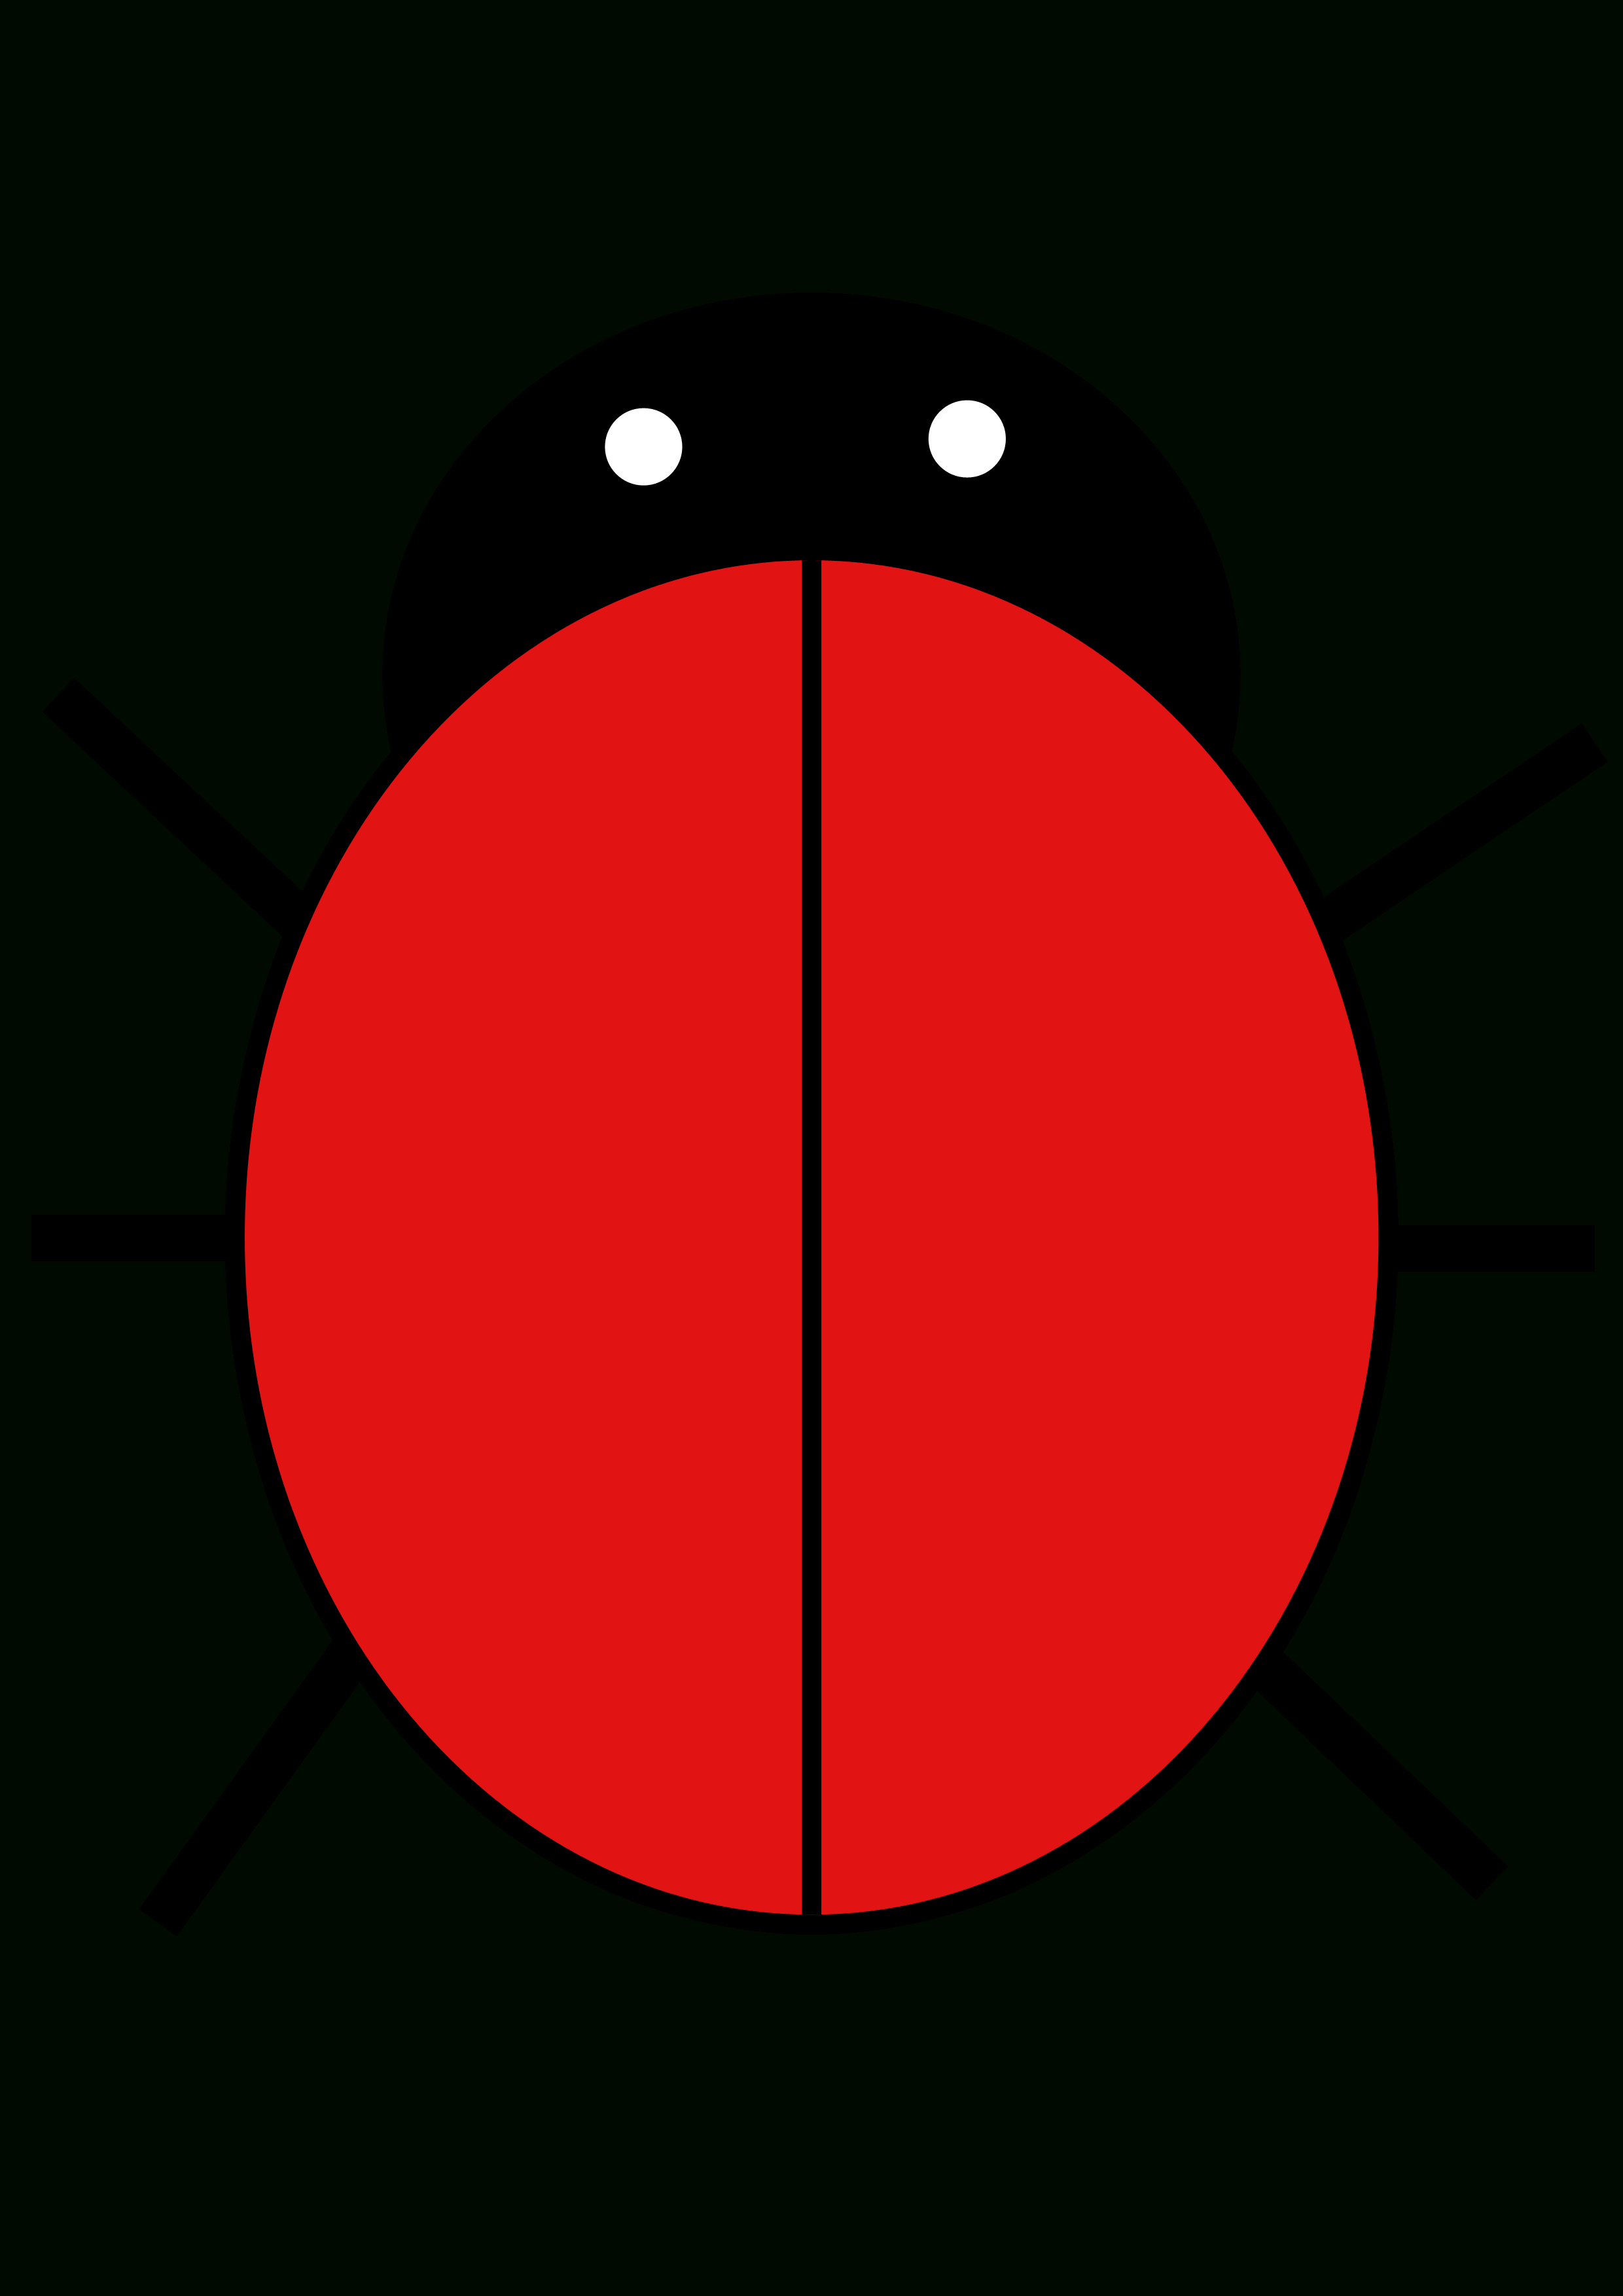 Ladybird  Free Images At Clker  Vector Clip Art Online throughout Blank Ladybug Template